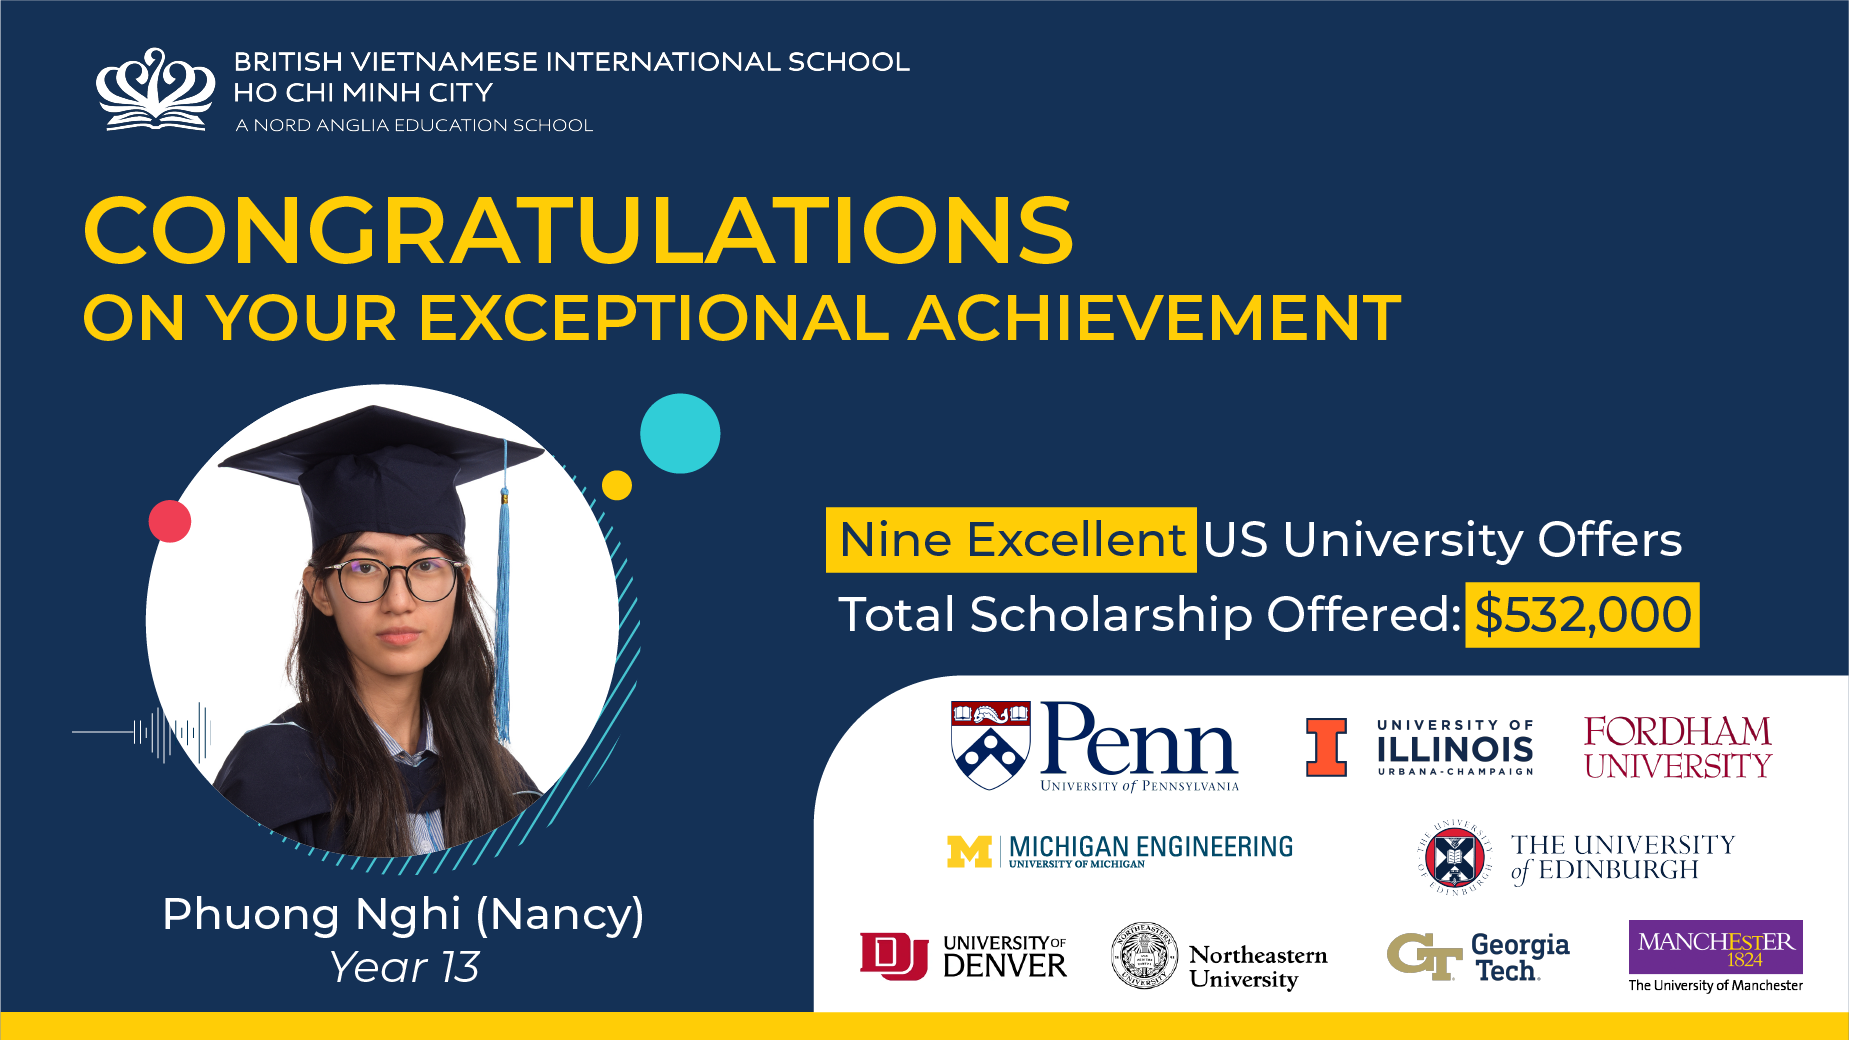 Phuong Nghi Nancy, a Year 13 student, has been excellently admitted to 9 US universities with a total scholarship of up to 13.5 billion VND - Phuong Nghi Nancy Year 13 excellently admitted 9 US universities scholarship 13 5 billion VND